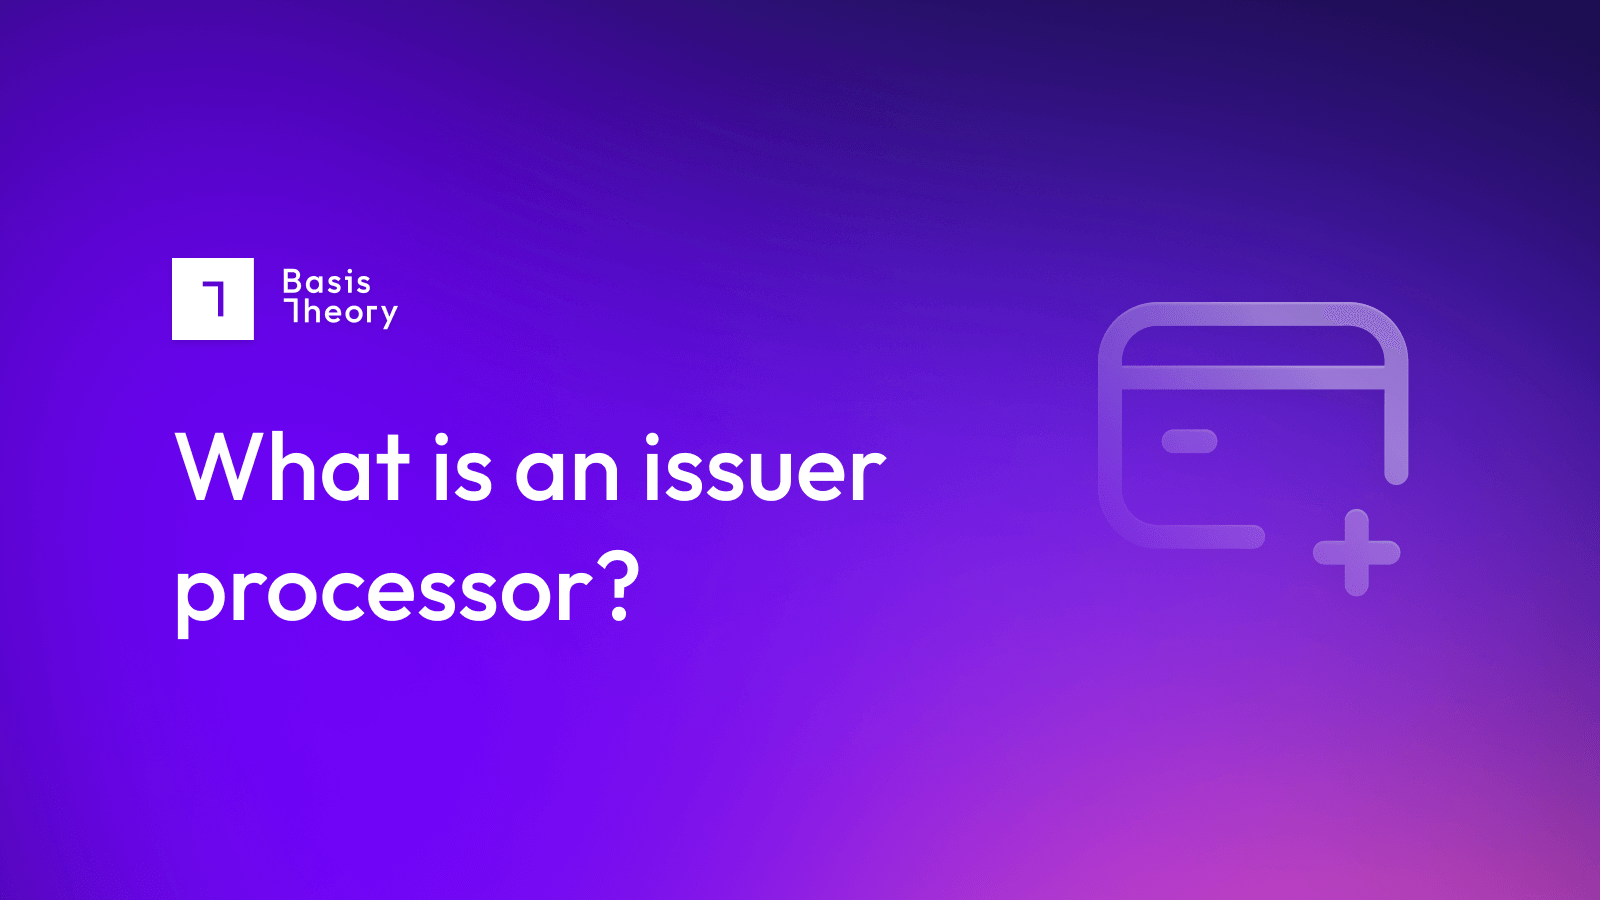 What is an issuer processor?